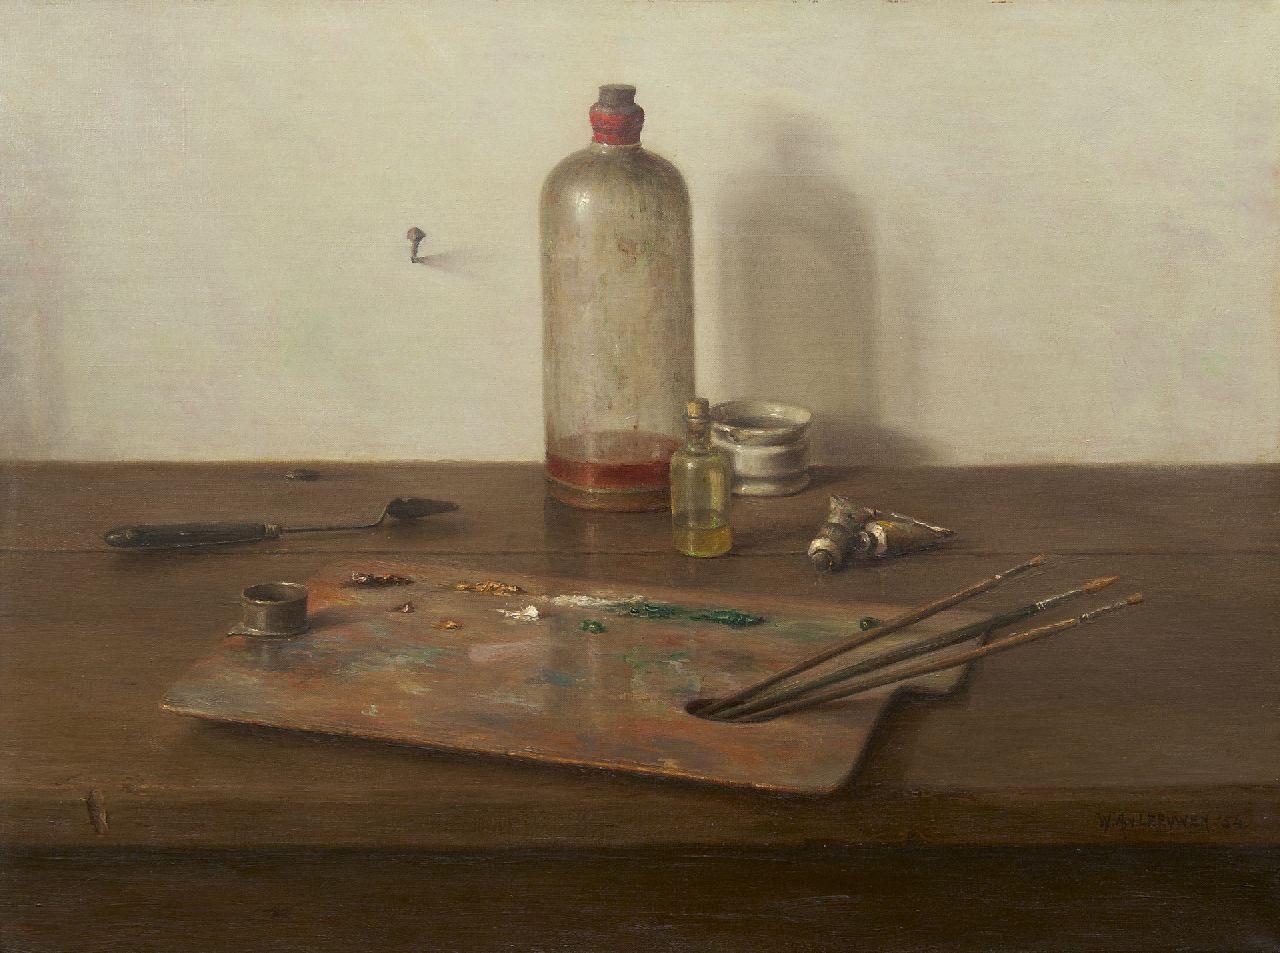 Willem van Leeuwen | a still life with painter's materials, oil on canvas, 45.2 x 60.2 cm, signed l.r. and dated '54